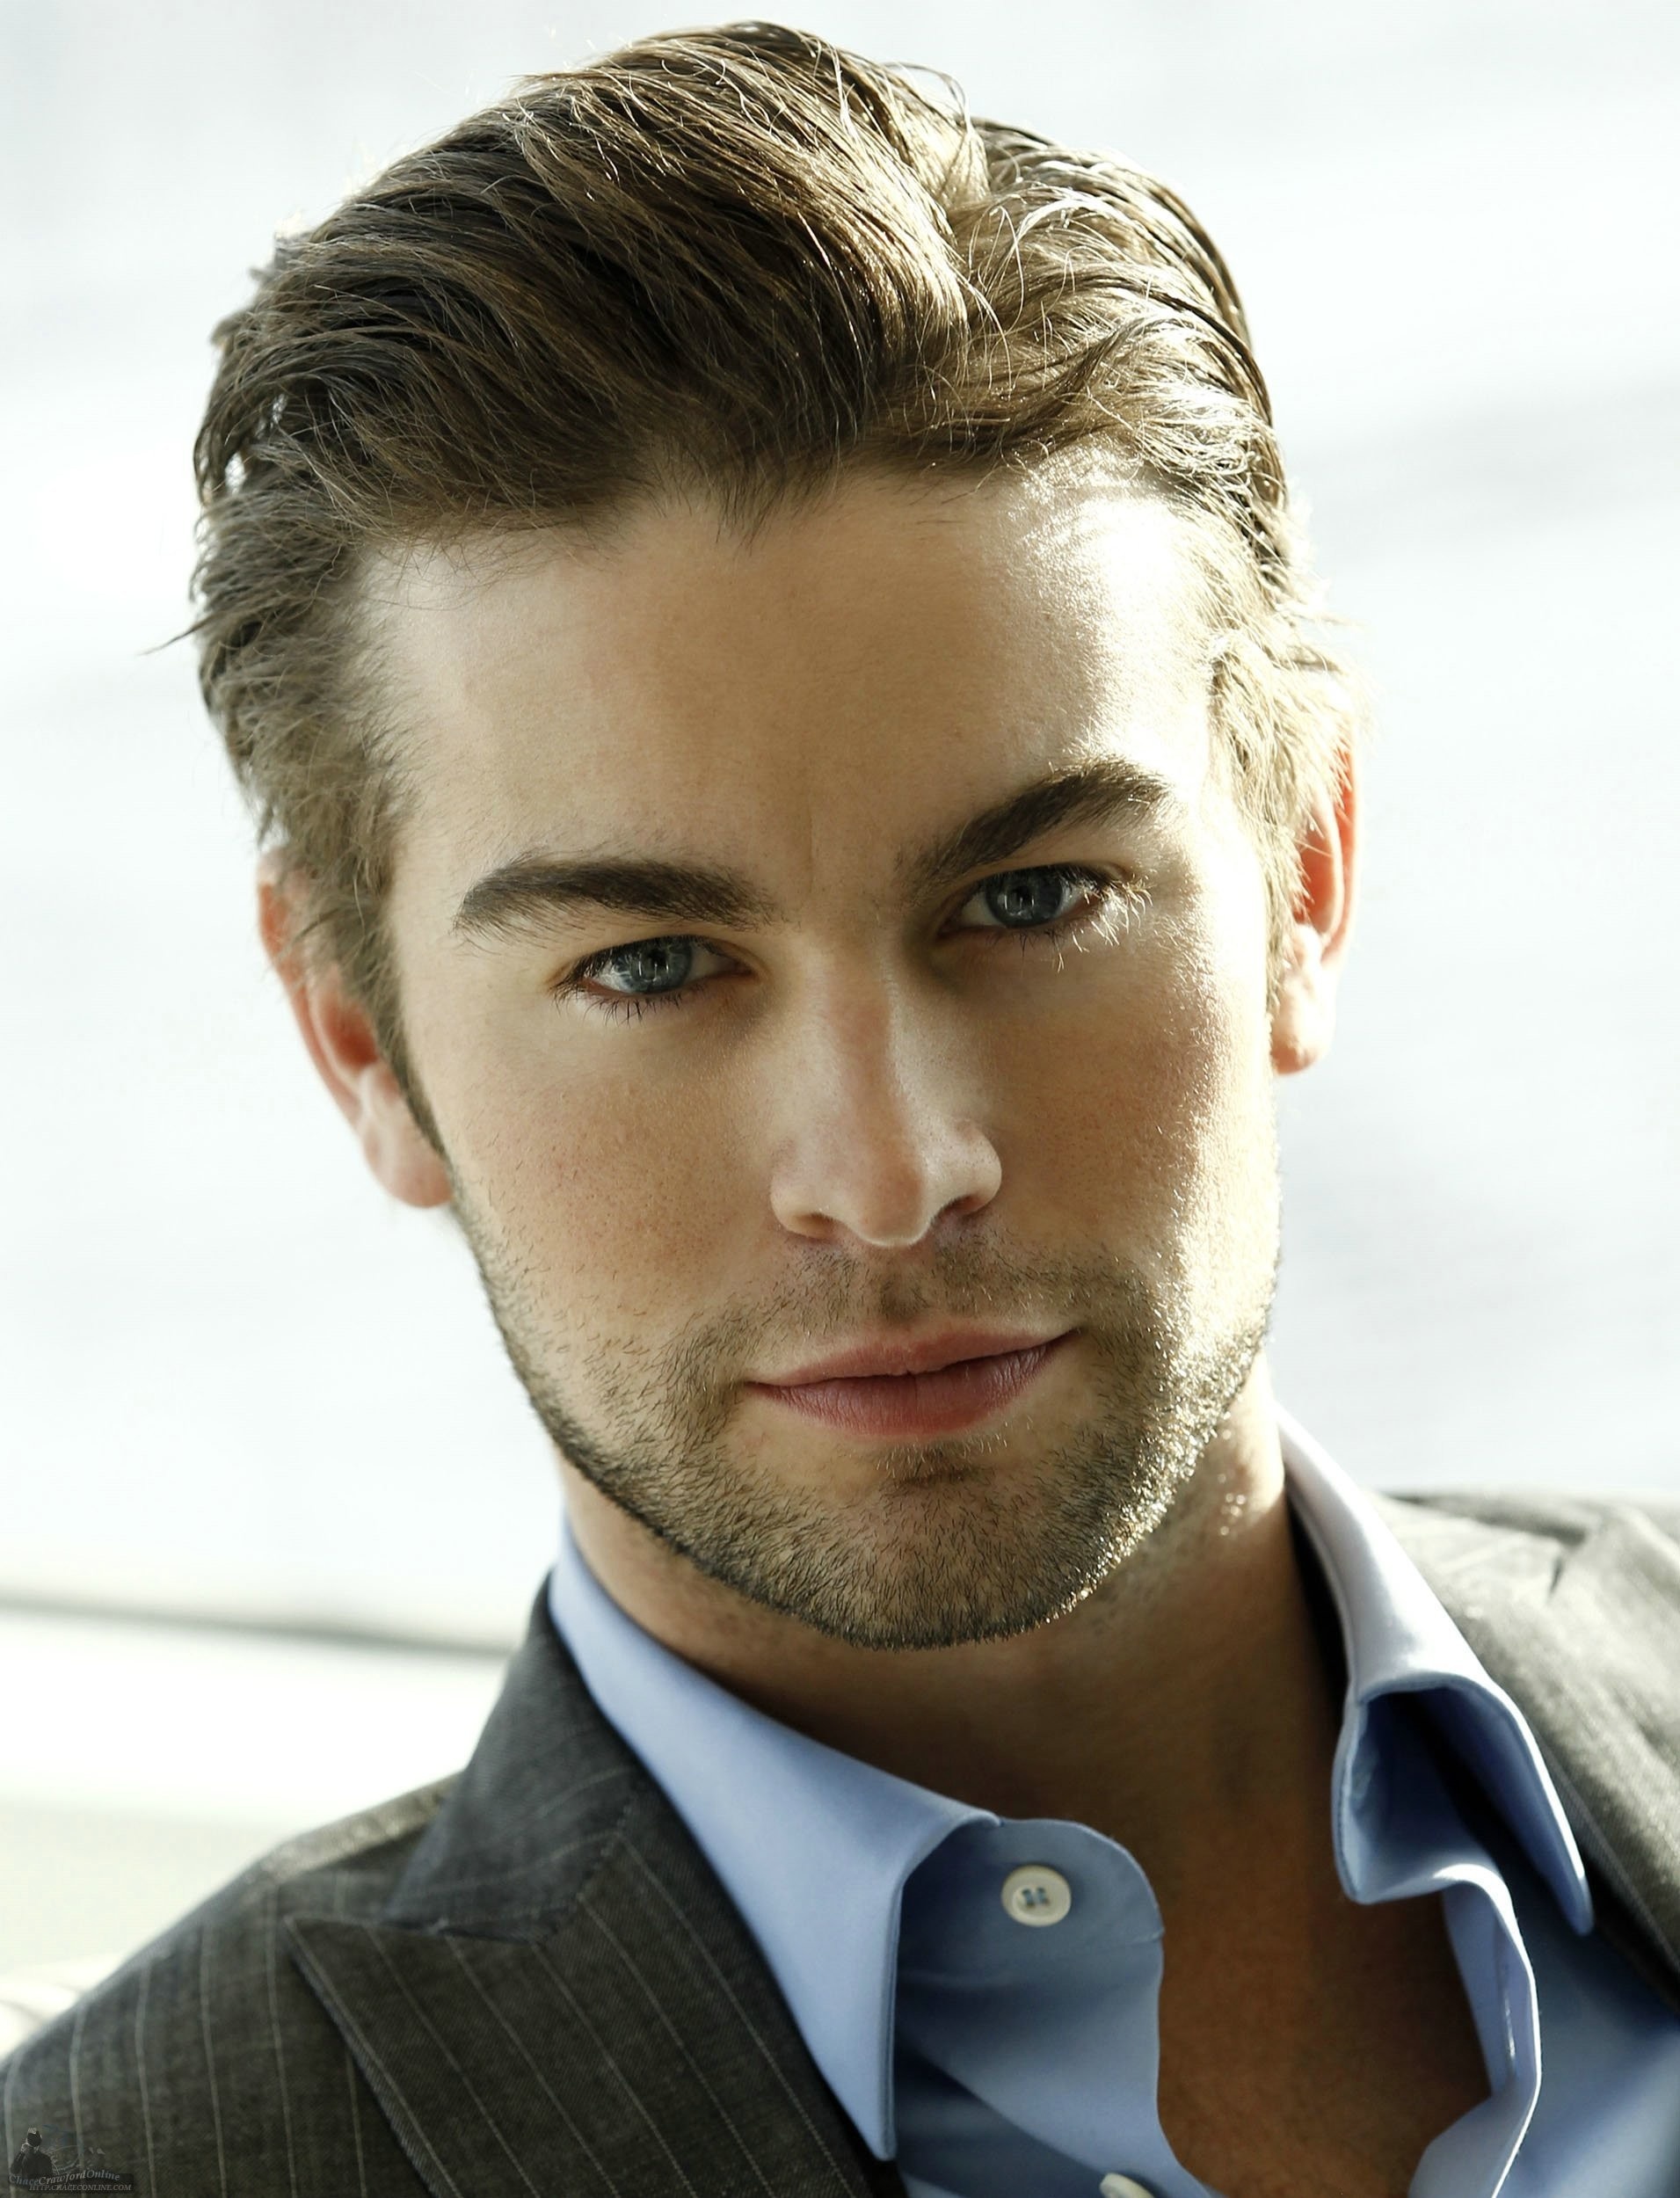 Chace Crawford: Nate Archibald (Gossip Girl), Kevin Moskowitz (The Boys), Billy LeFever (Blood & Oil). 1920x2500 HD Wallpaper.